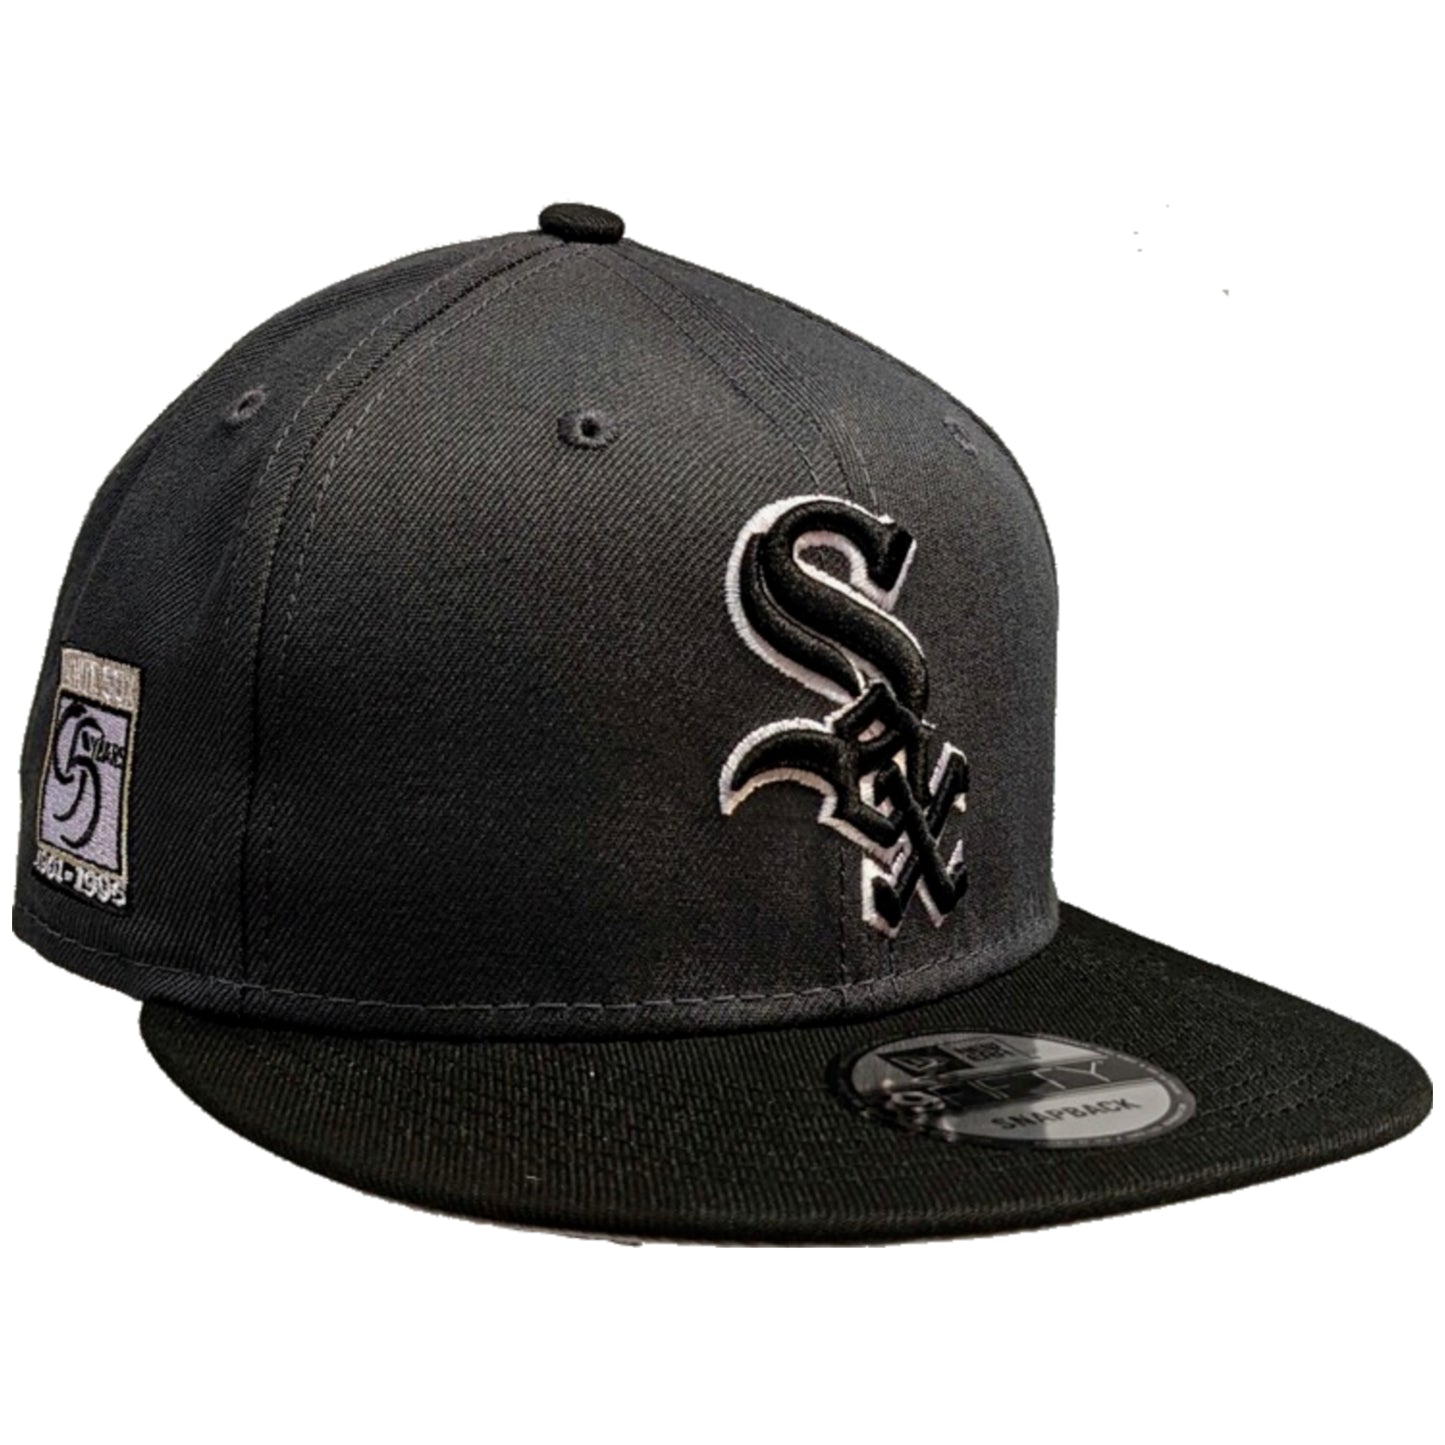 Mens Chicago White Sox New Era Graphite and Black 95th Anniversary Side Patch 9FIFTY Snapback Hat